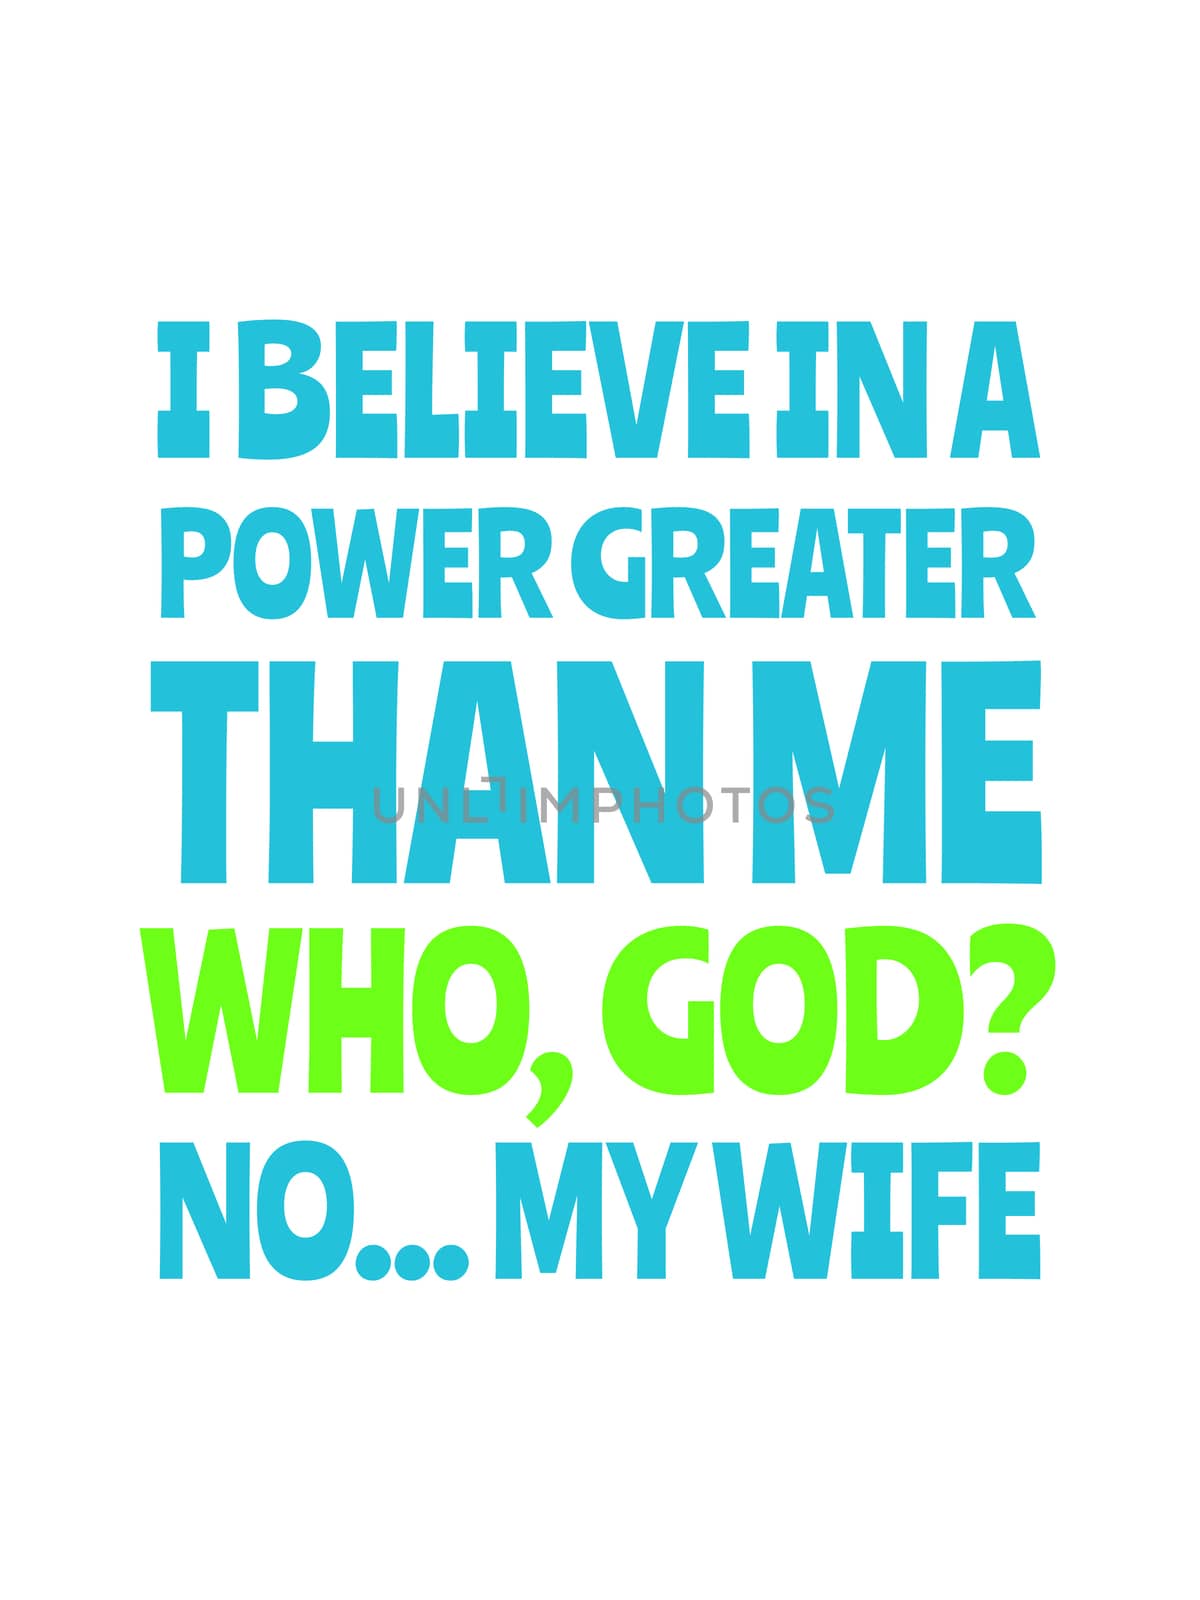 I believe in a power greater than me, who, god? no... my wife